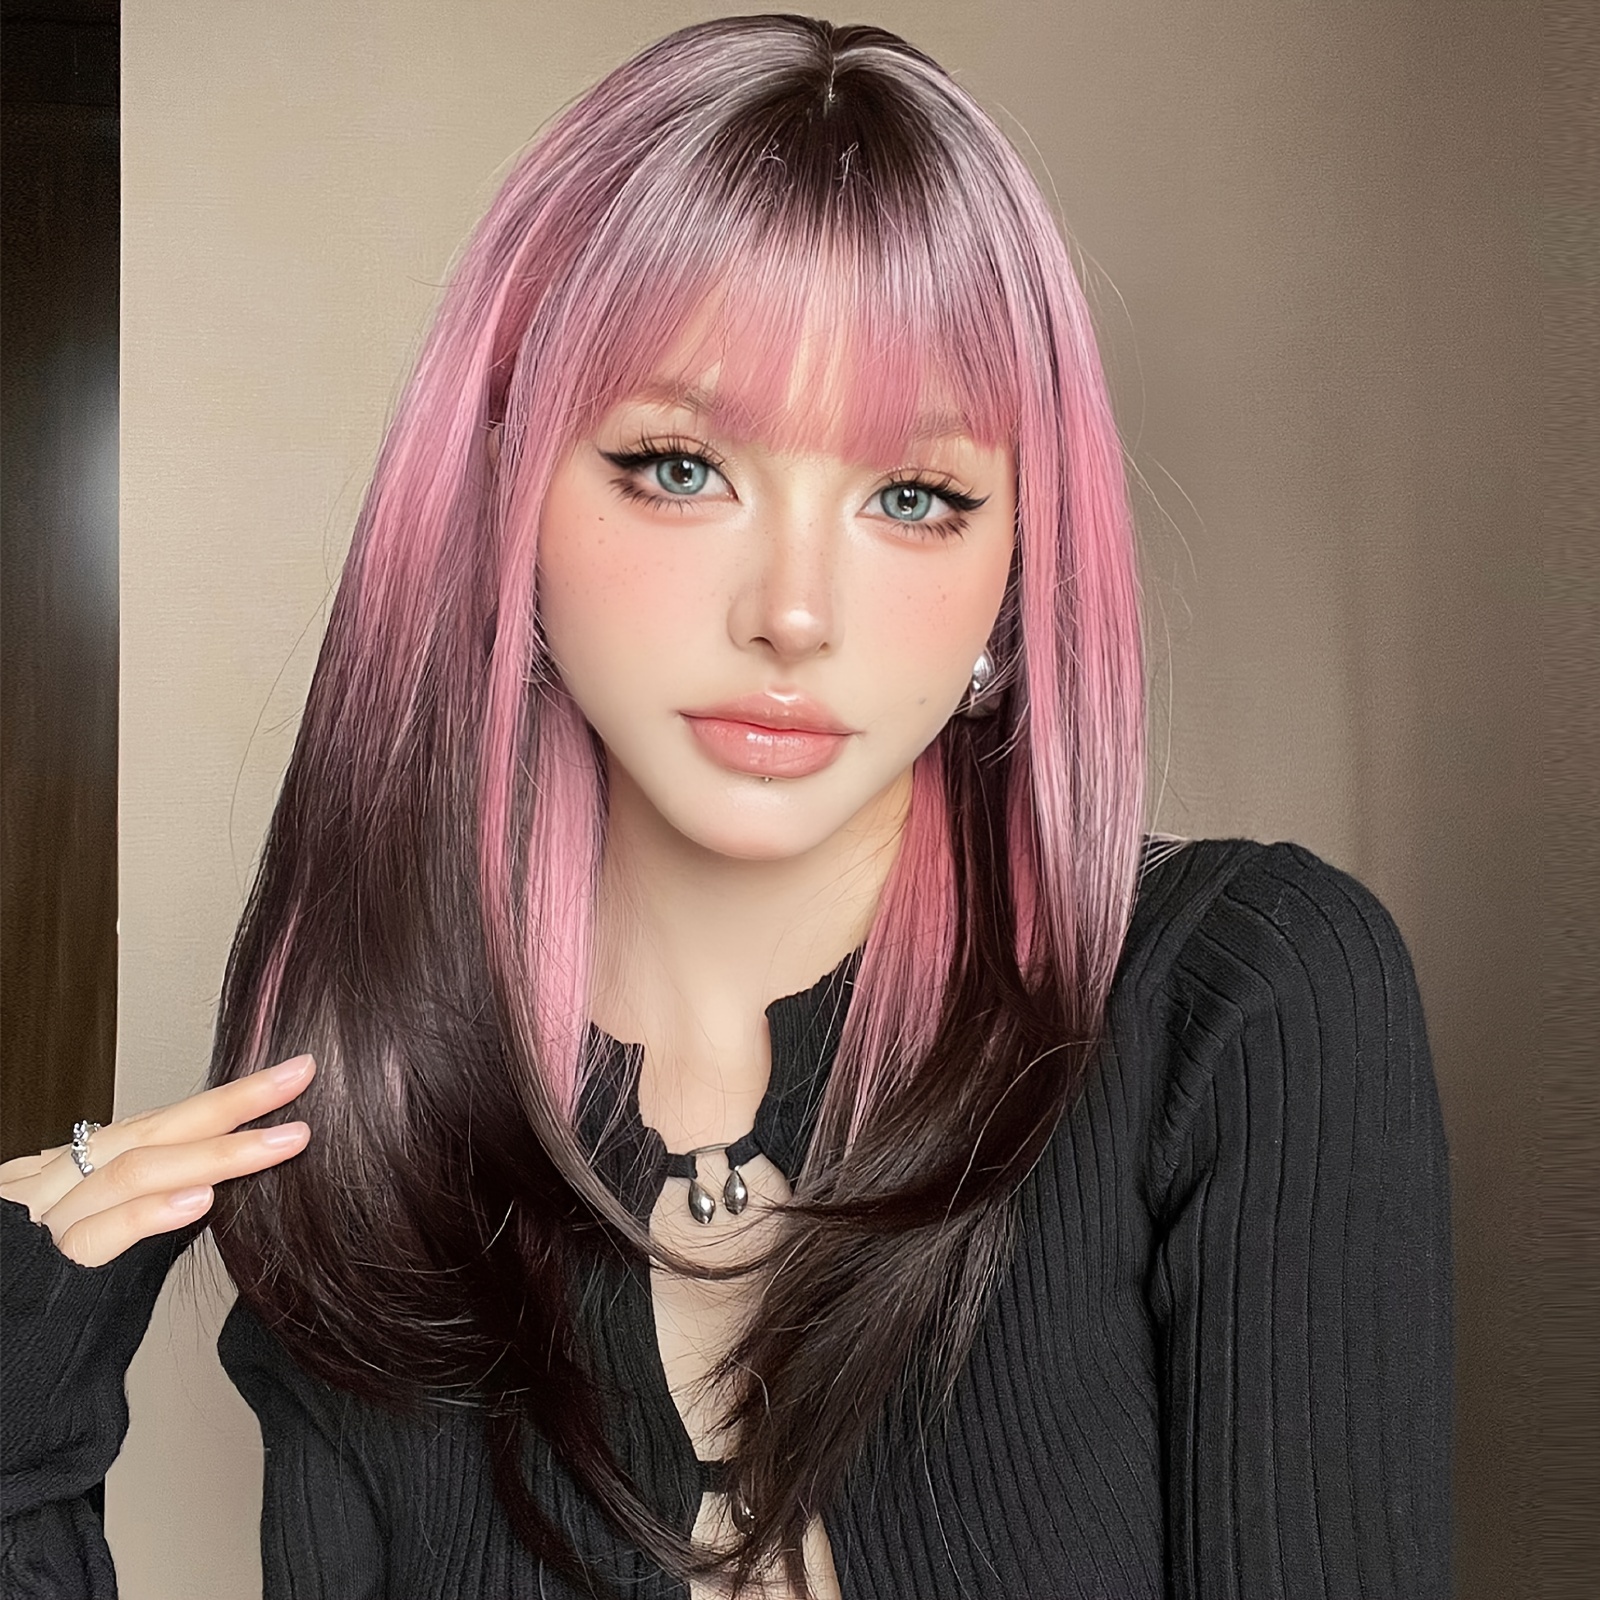 

Chic 22" Pink Ombre To Black Long Straight Wig With Bangs For Women - Heat Resistant Synthetic Hair, Perfect For Daily Wear, Parties & Cosplay Wigs For Women Short Wigs For Women